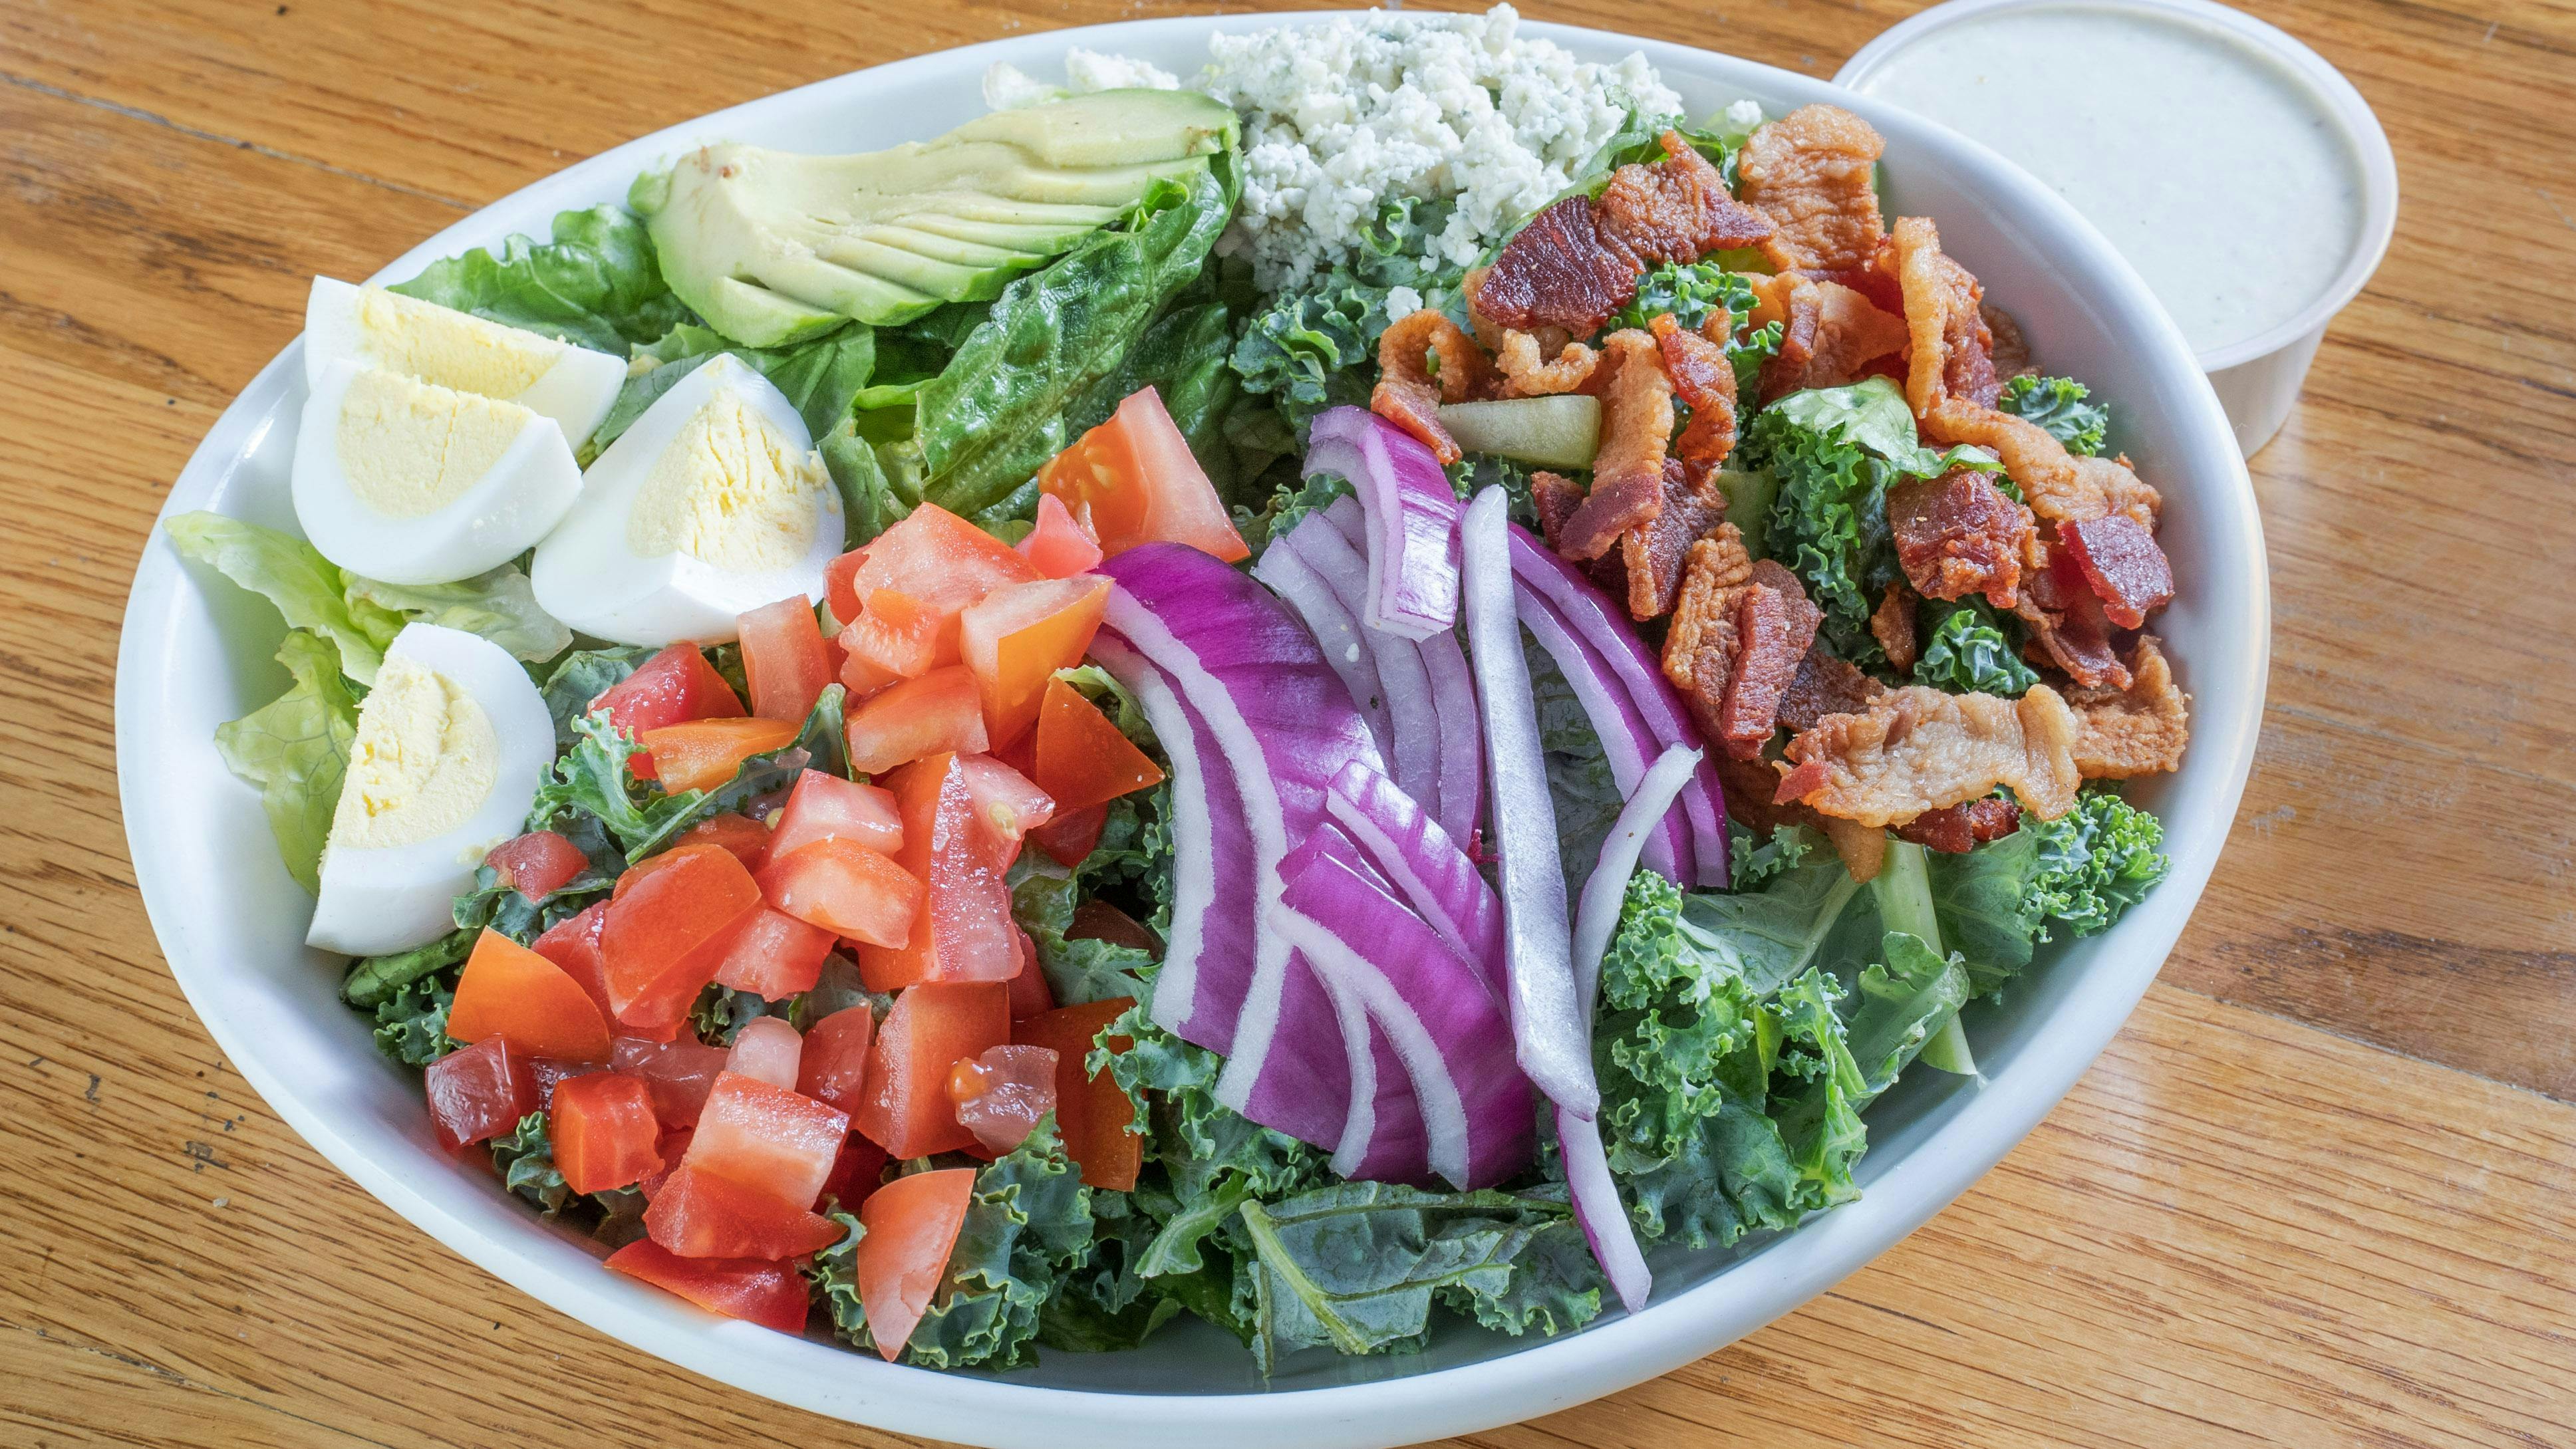 Traditional Cobb from Austin Salad Company - East 6th St in Austin, TX